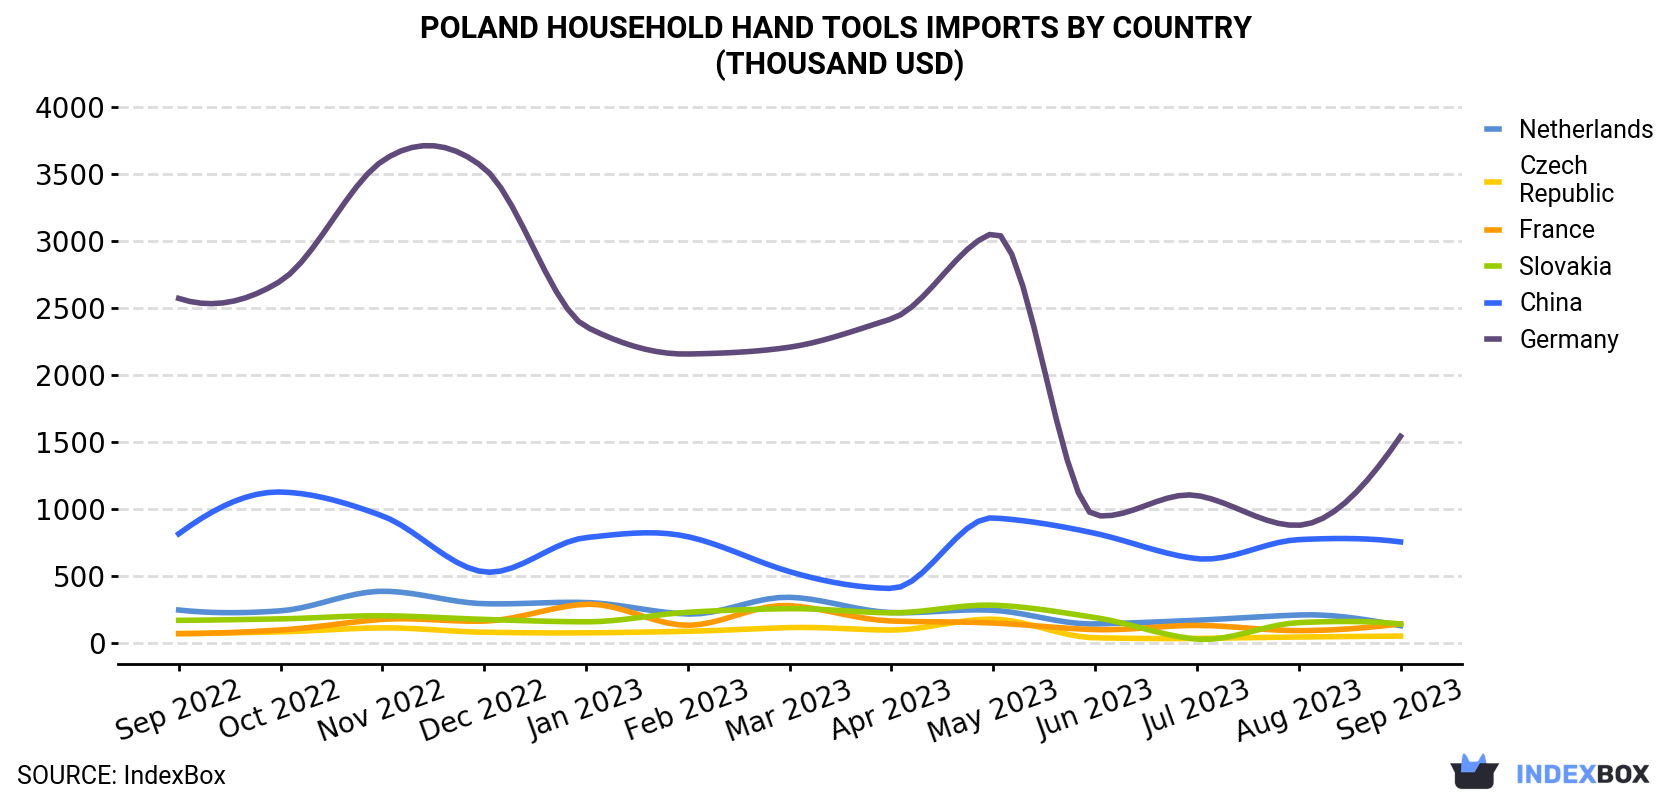 Poland Household Hand Tools Imports By Country (Thousand USD)